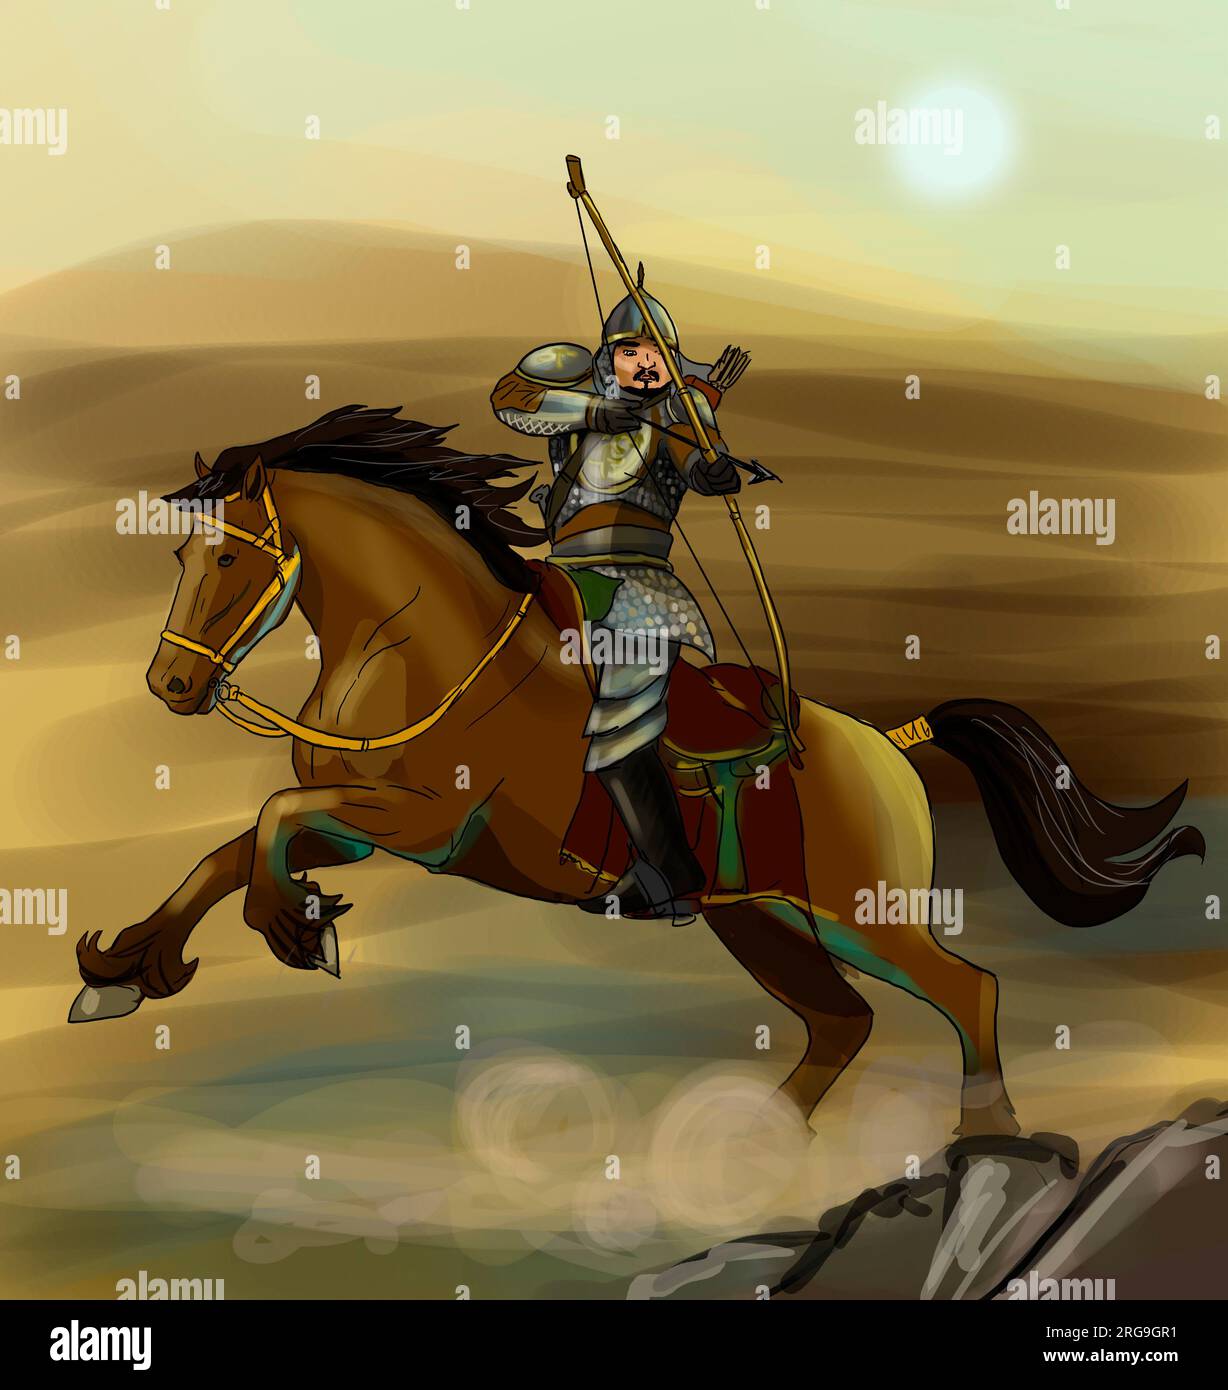 Koblandy Batyr, Kazakh hero and warrior from the Kara-Kipshak tribe whose exploits in battles with Kalmyk warriors were known through folk legends and epics. He was a legendary character who became a historical person in people's minds. Stock Photo